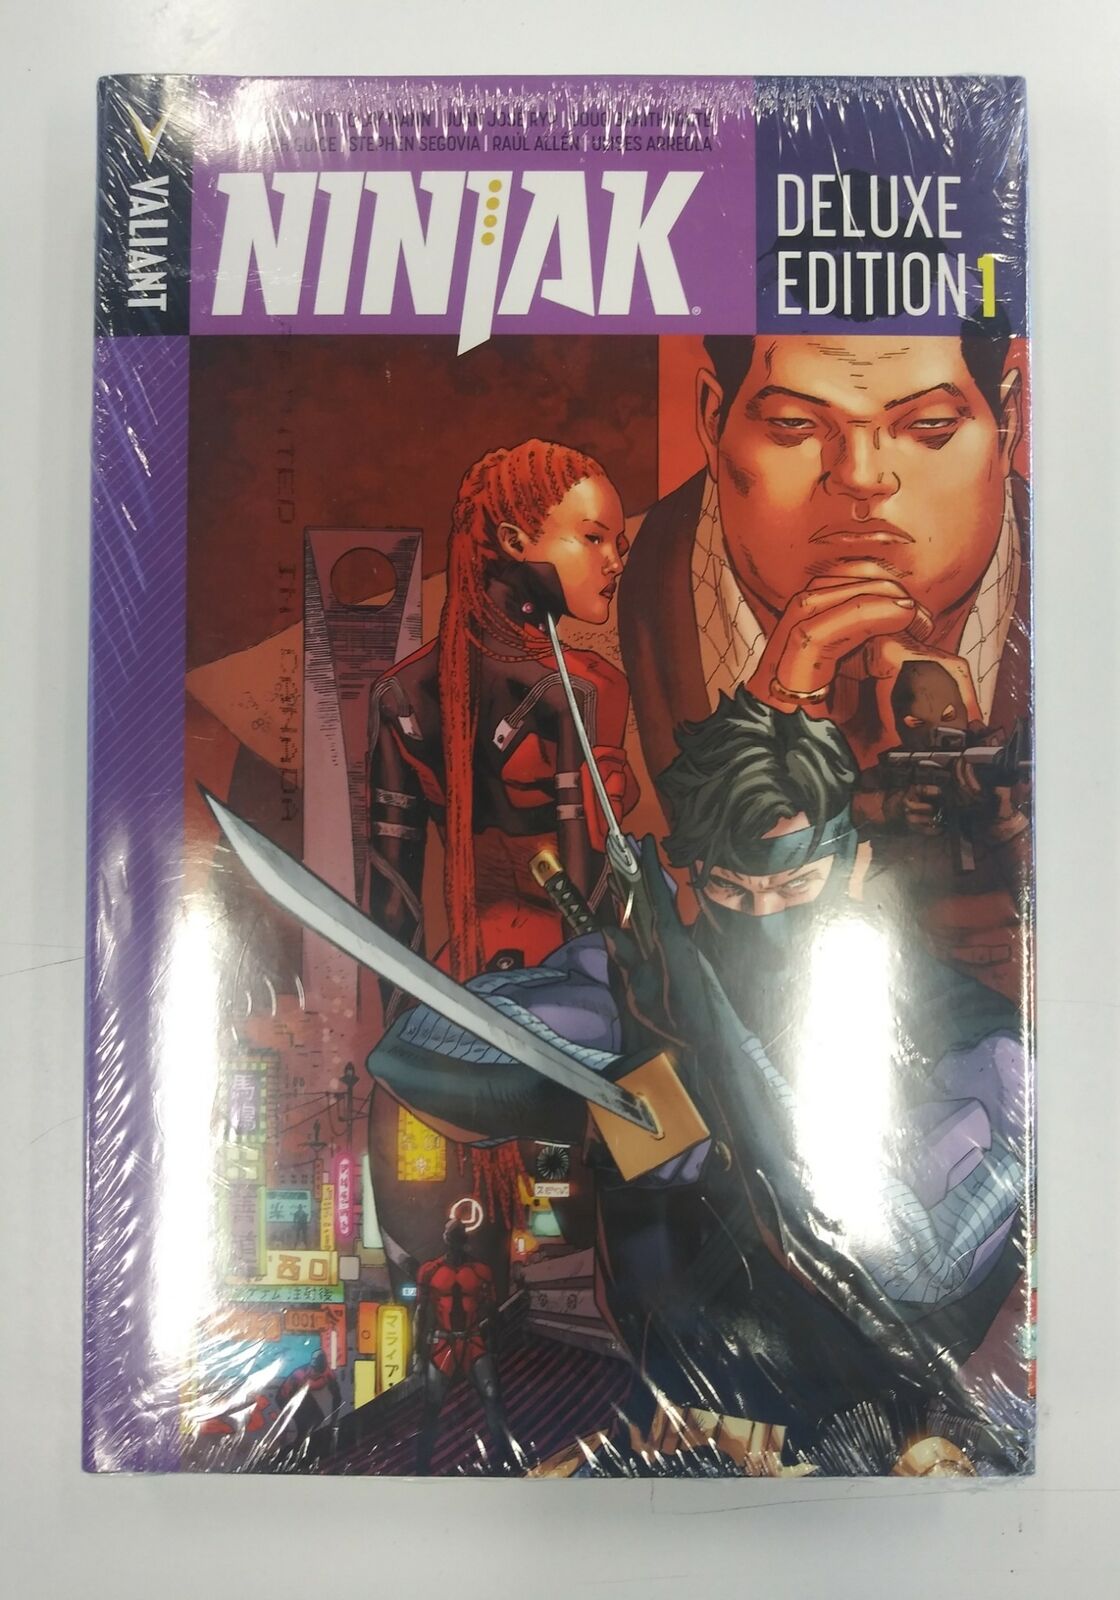 NINJAK DELUXE EDITION #1 HARDCOVER HC VALIANT SEALED IN PLASTIC SEE PICS